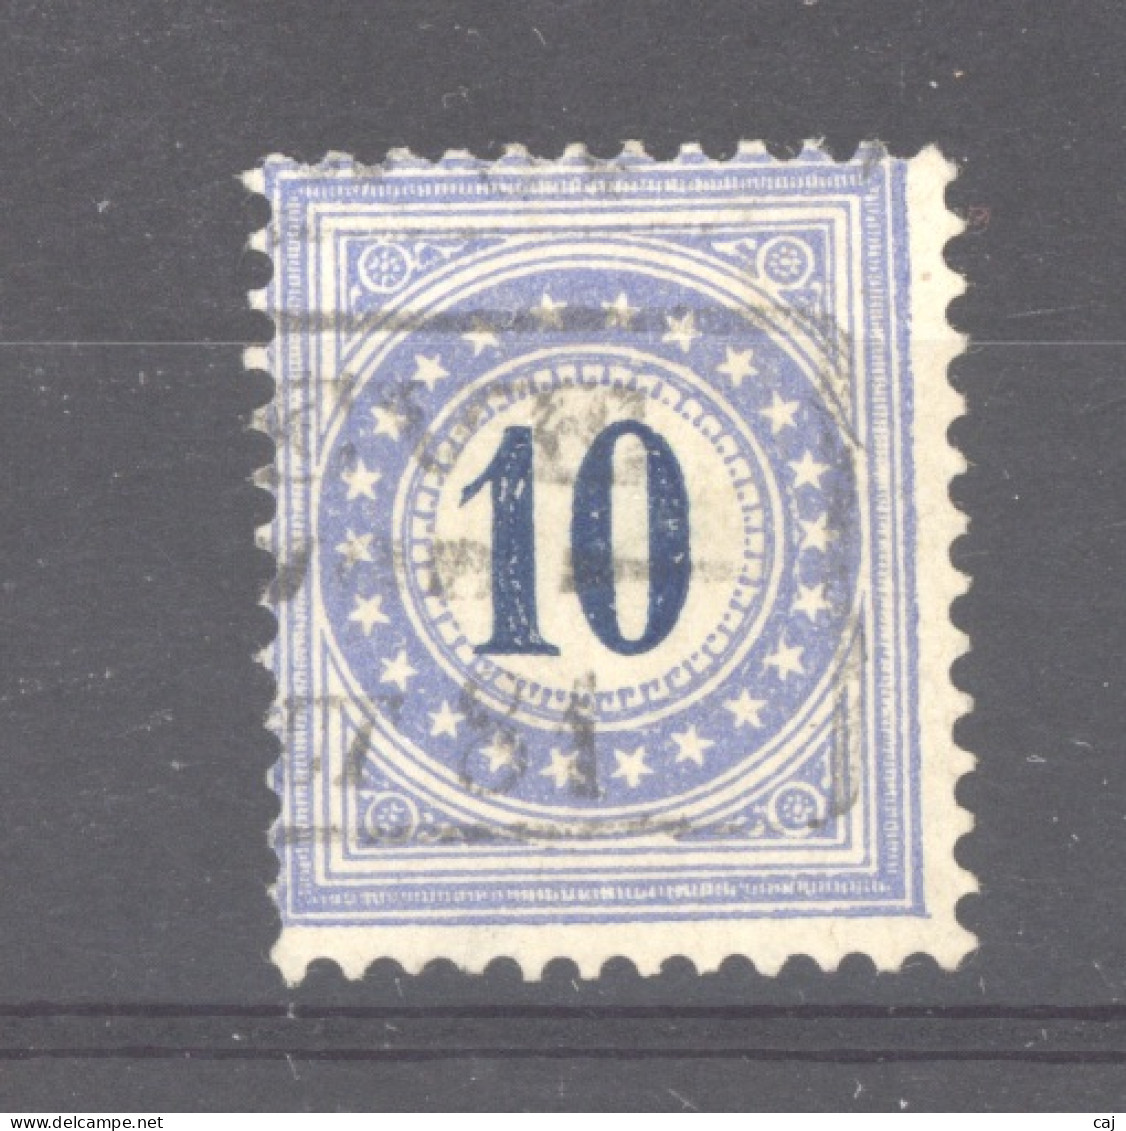 0ch  1559   -  Suisse   -  Taxe  -  1878  :    5  (o) ,  Type II , Cadre Normal - Postage Due